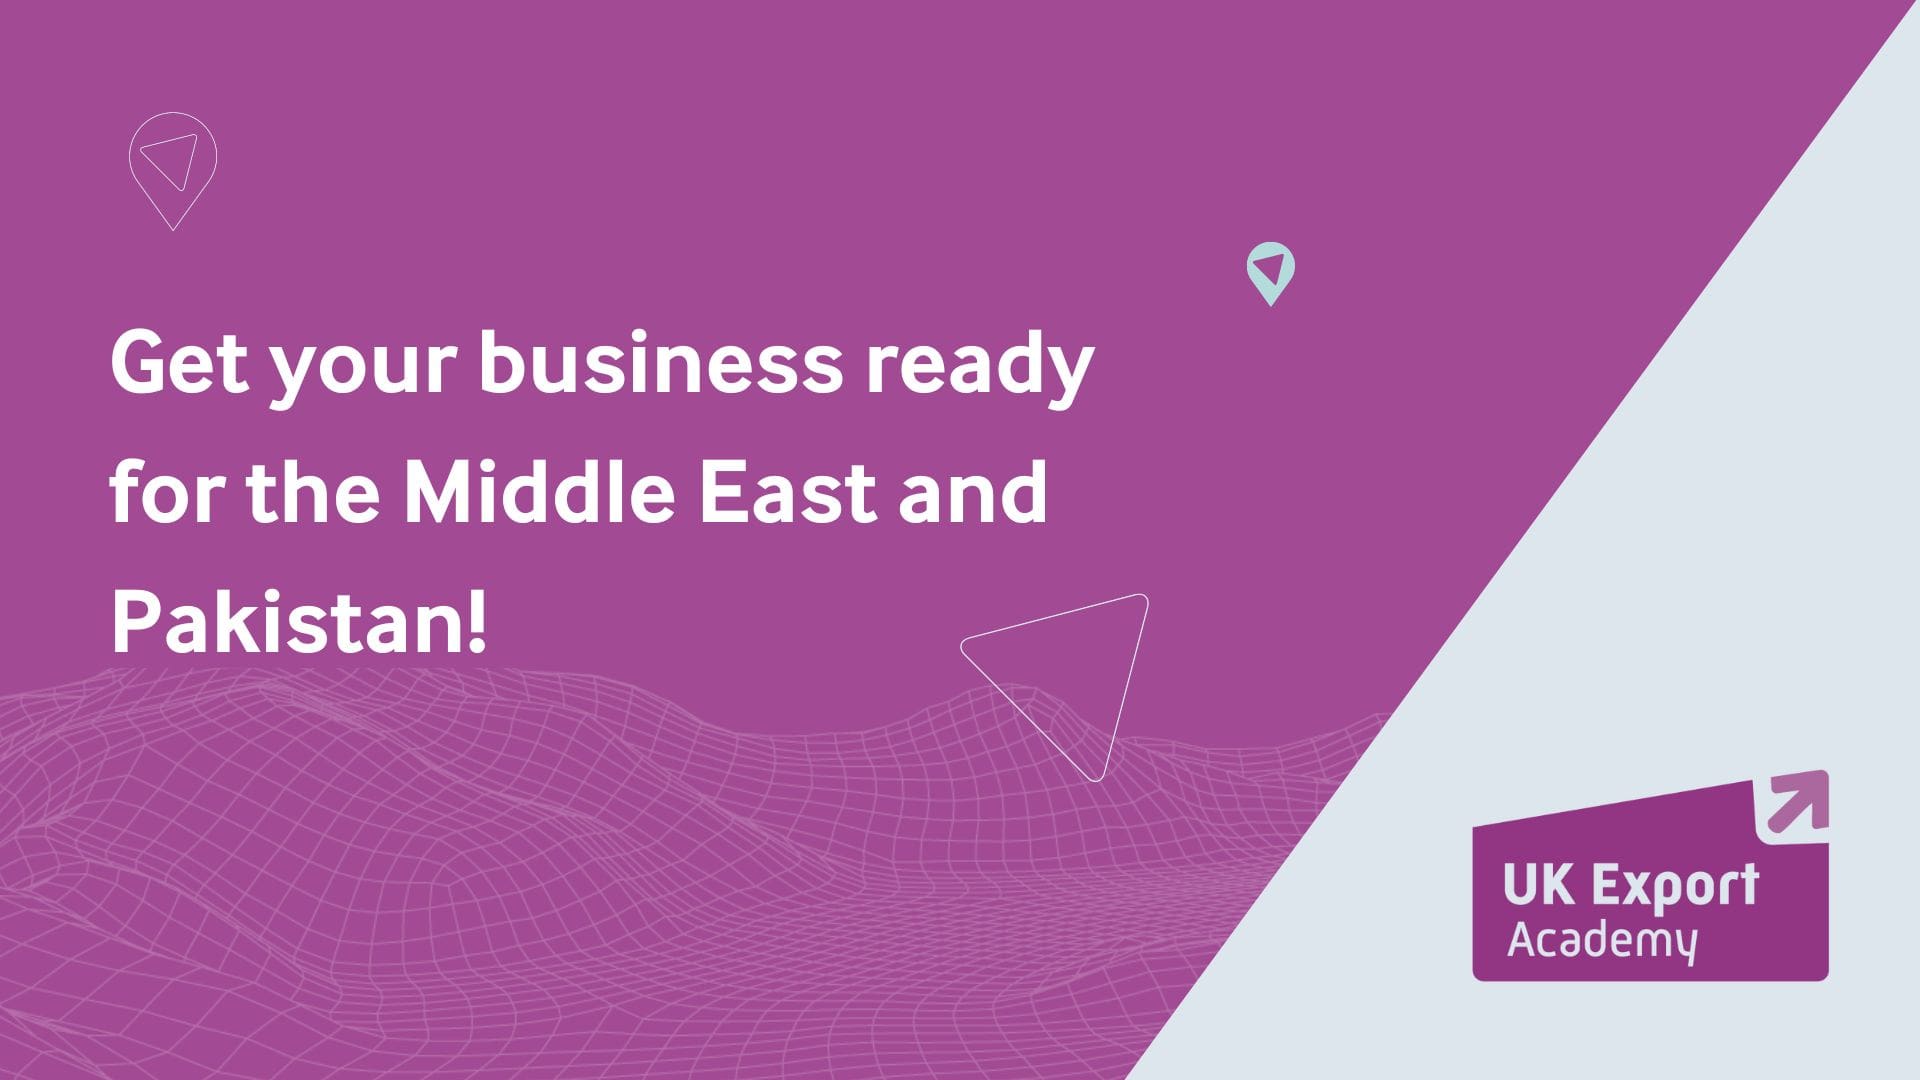 Get your business ready for the Middle East and Pakistan